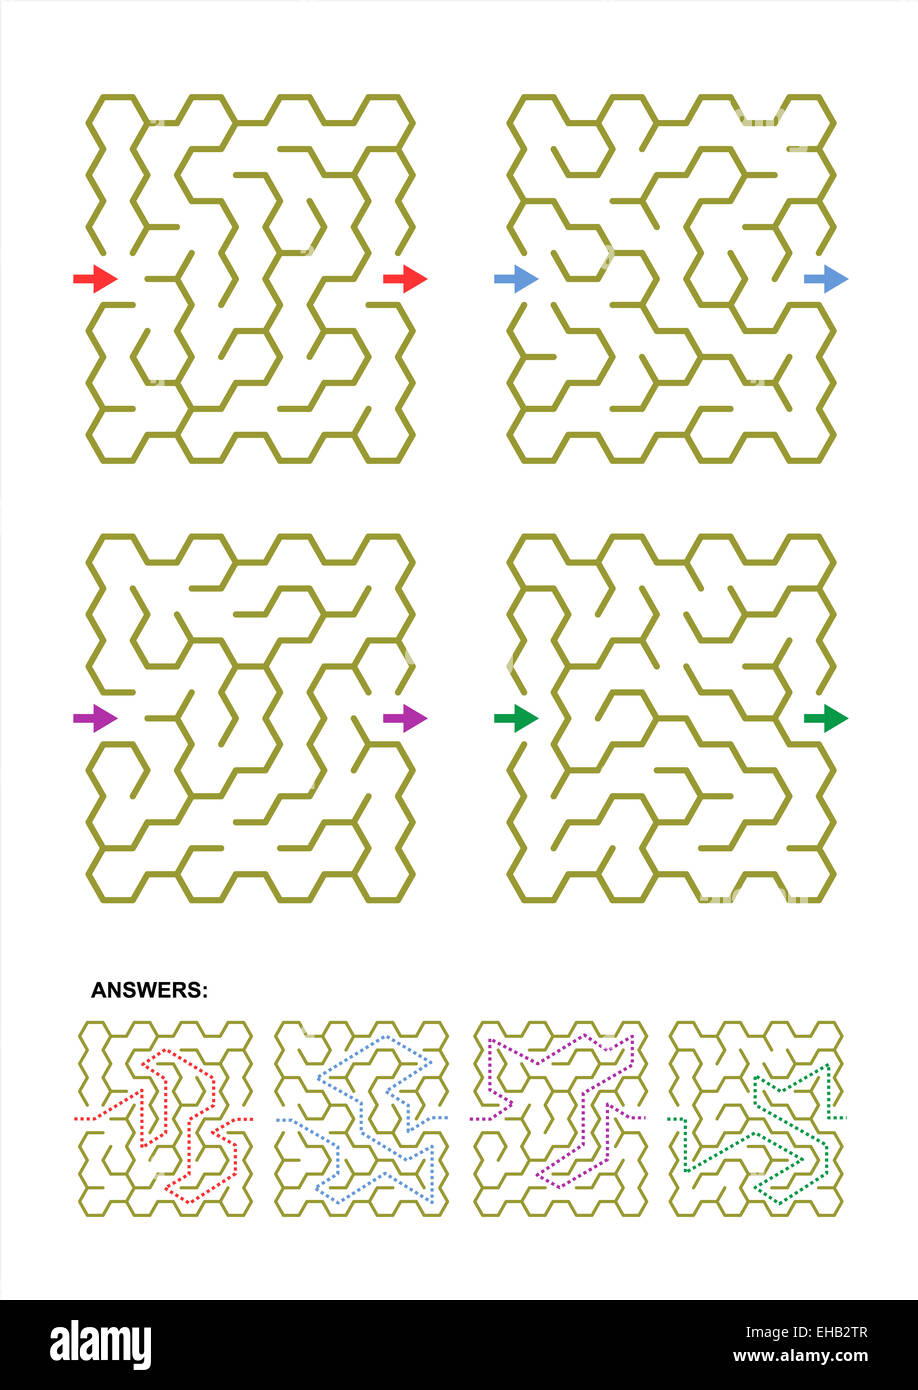 Four different (hexagonally shaped) maze templates suitable for various designs. Answers included. Stock Photo